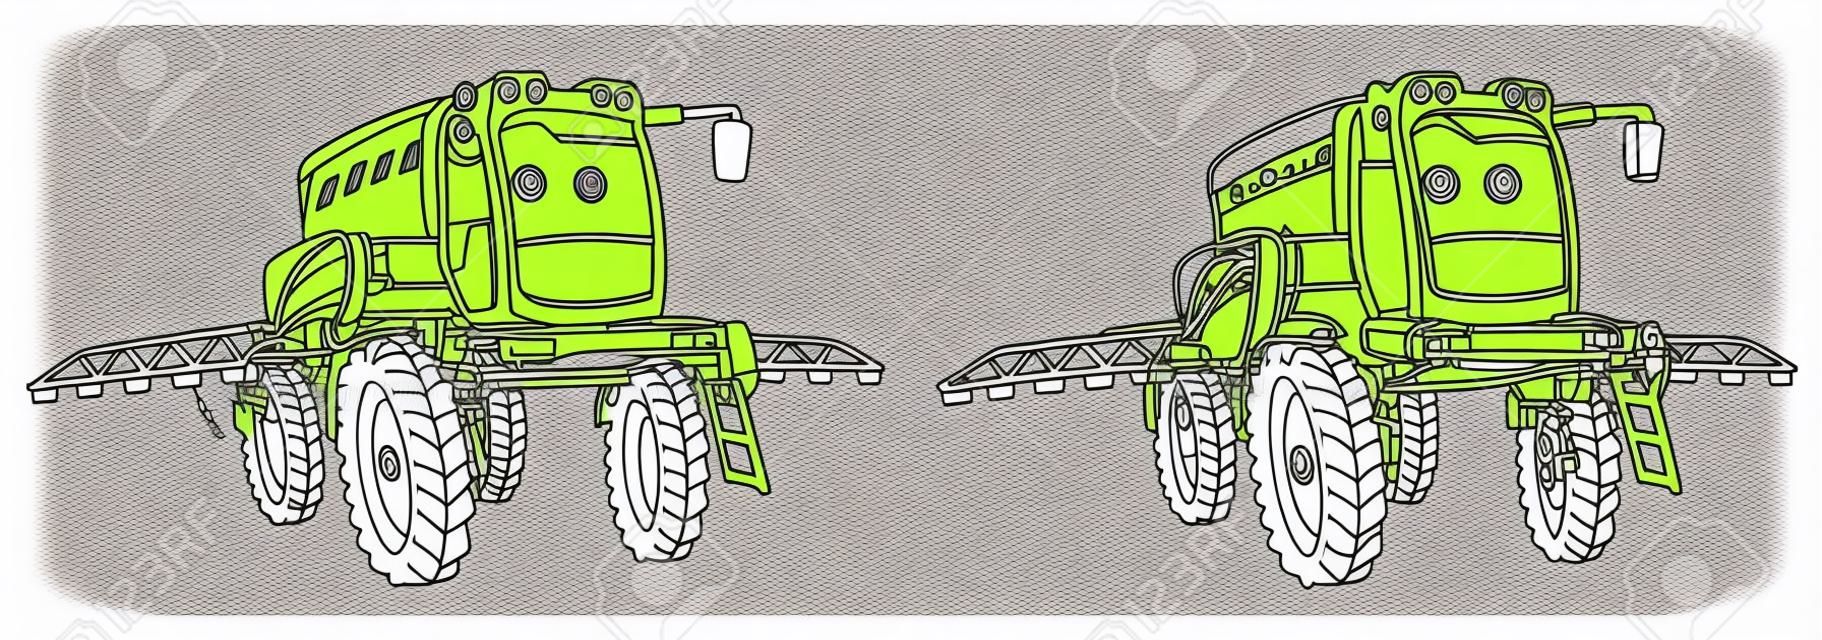 Coloring page with crop irrigation machine. Line art drawing for kids activity coloring book. Colorful clip art. Vector illustration.